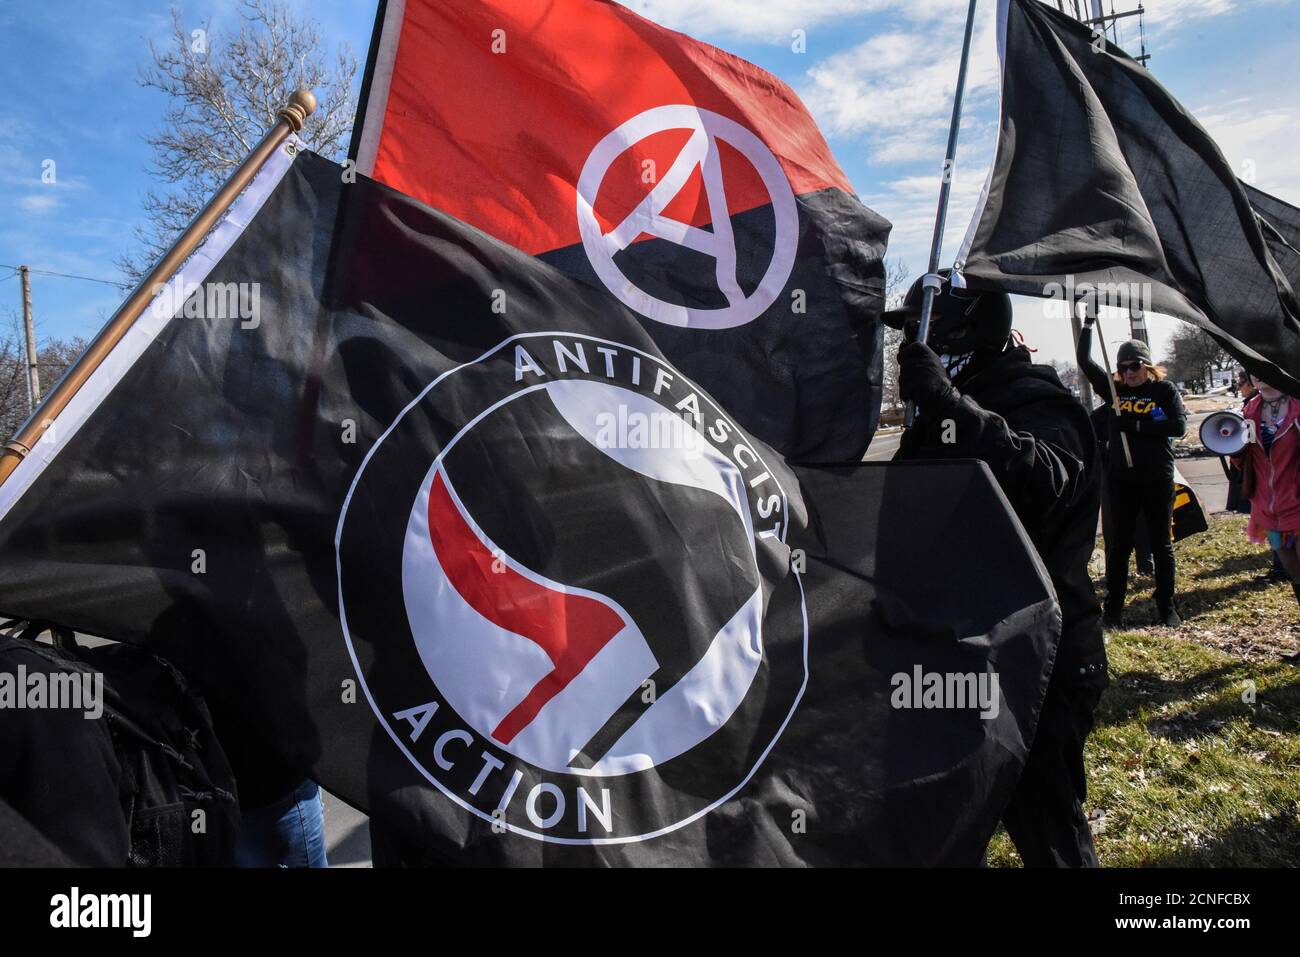 Members of the Great Lakes anti-fascist organization (Antifa) fly flags during a protest against the Alt-right outside a hotel in Warren, Michigan, U.S., March 4, 2018. REUTERS/Stephanie Keith Stock Photo